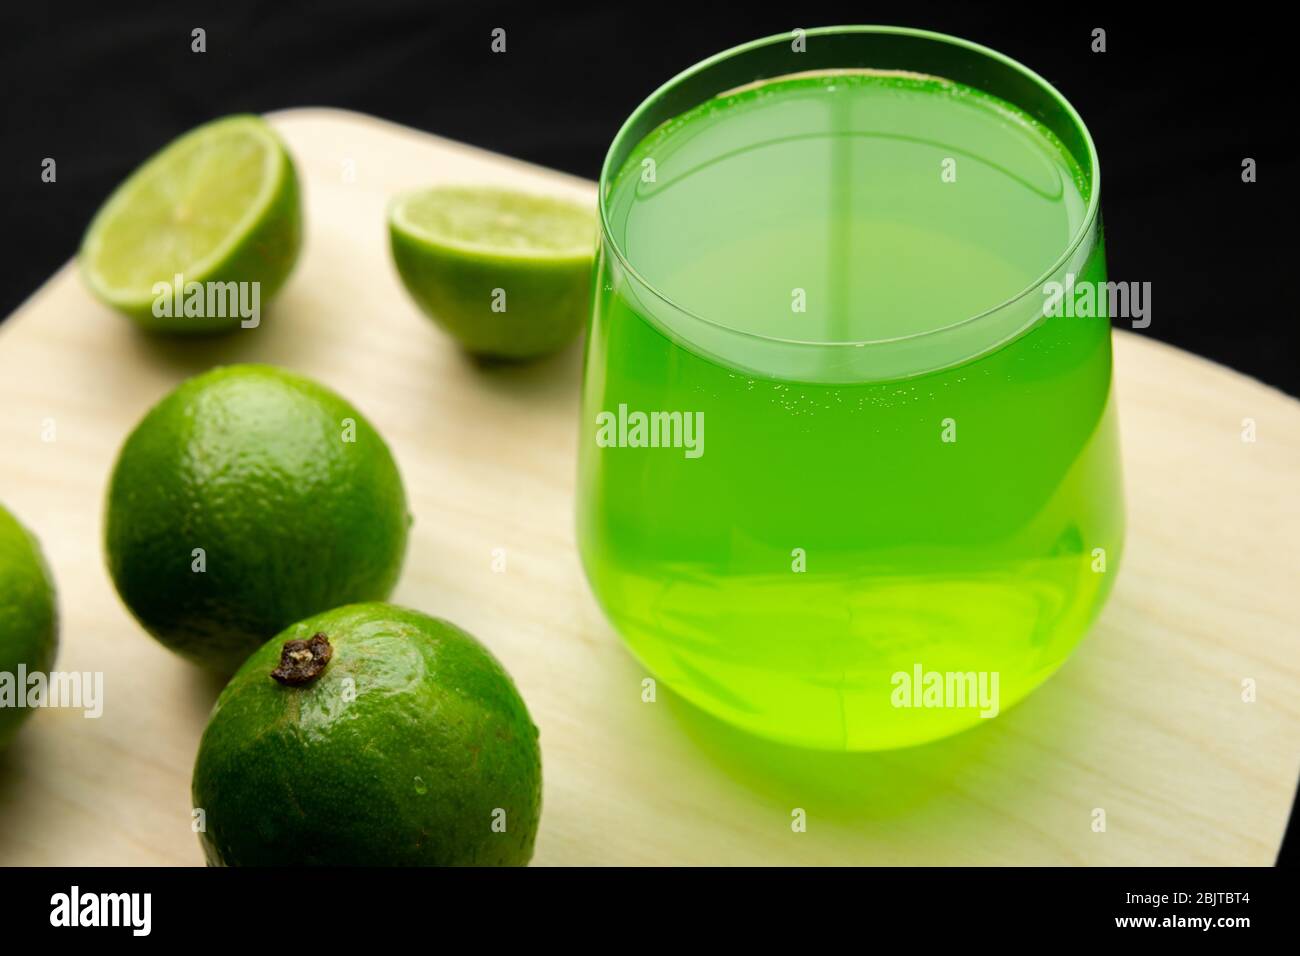 limes juice, lemonade in a glass glass. Healthy lifestyle and detox conceptual background Stock Photo